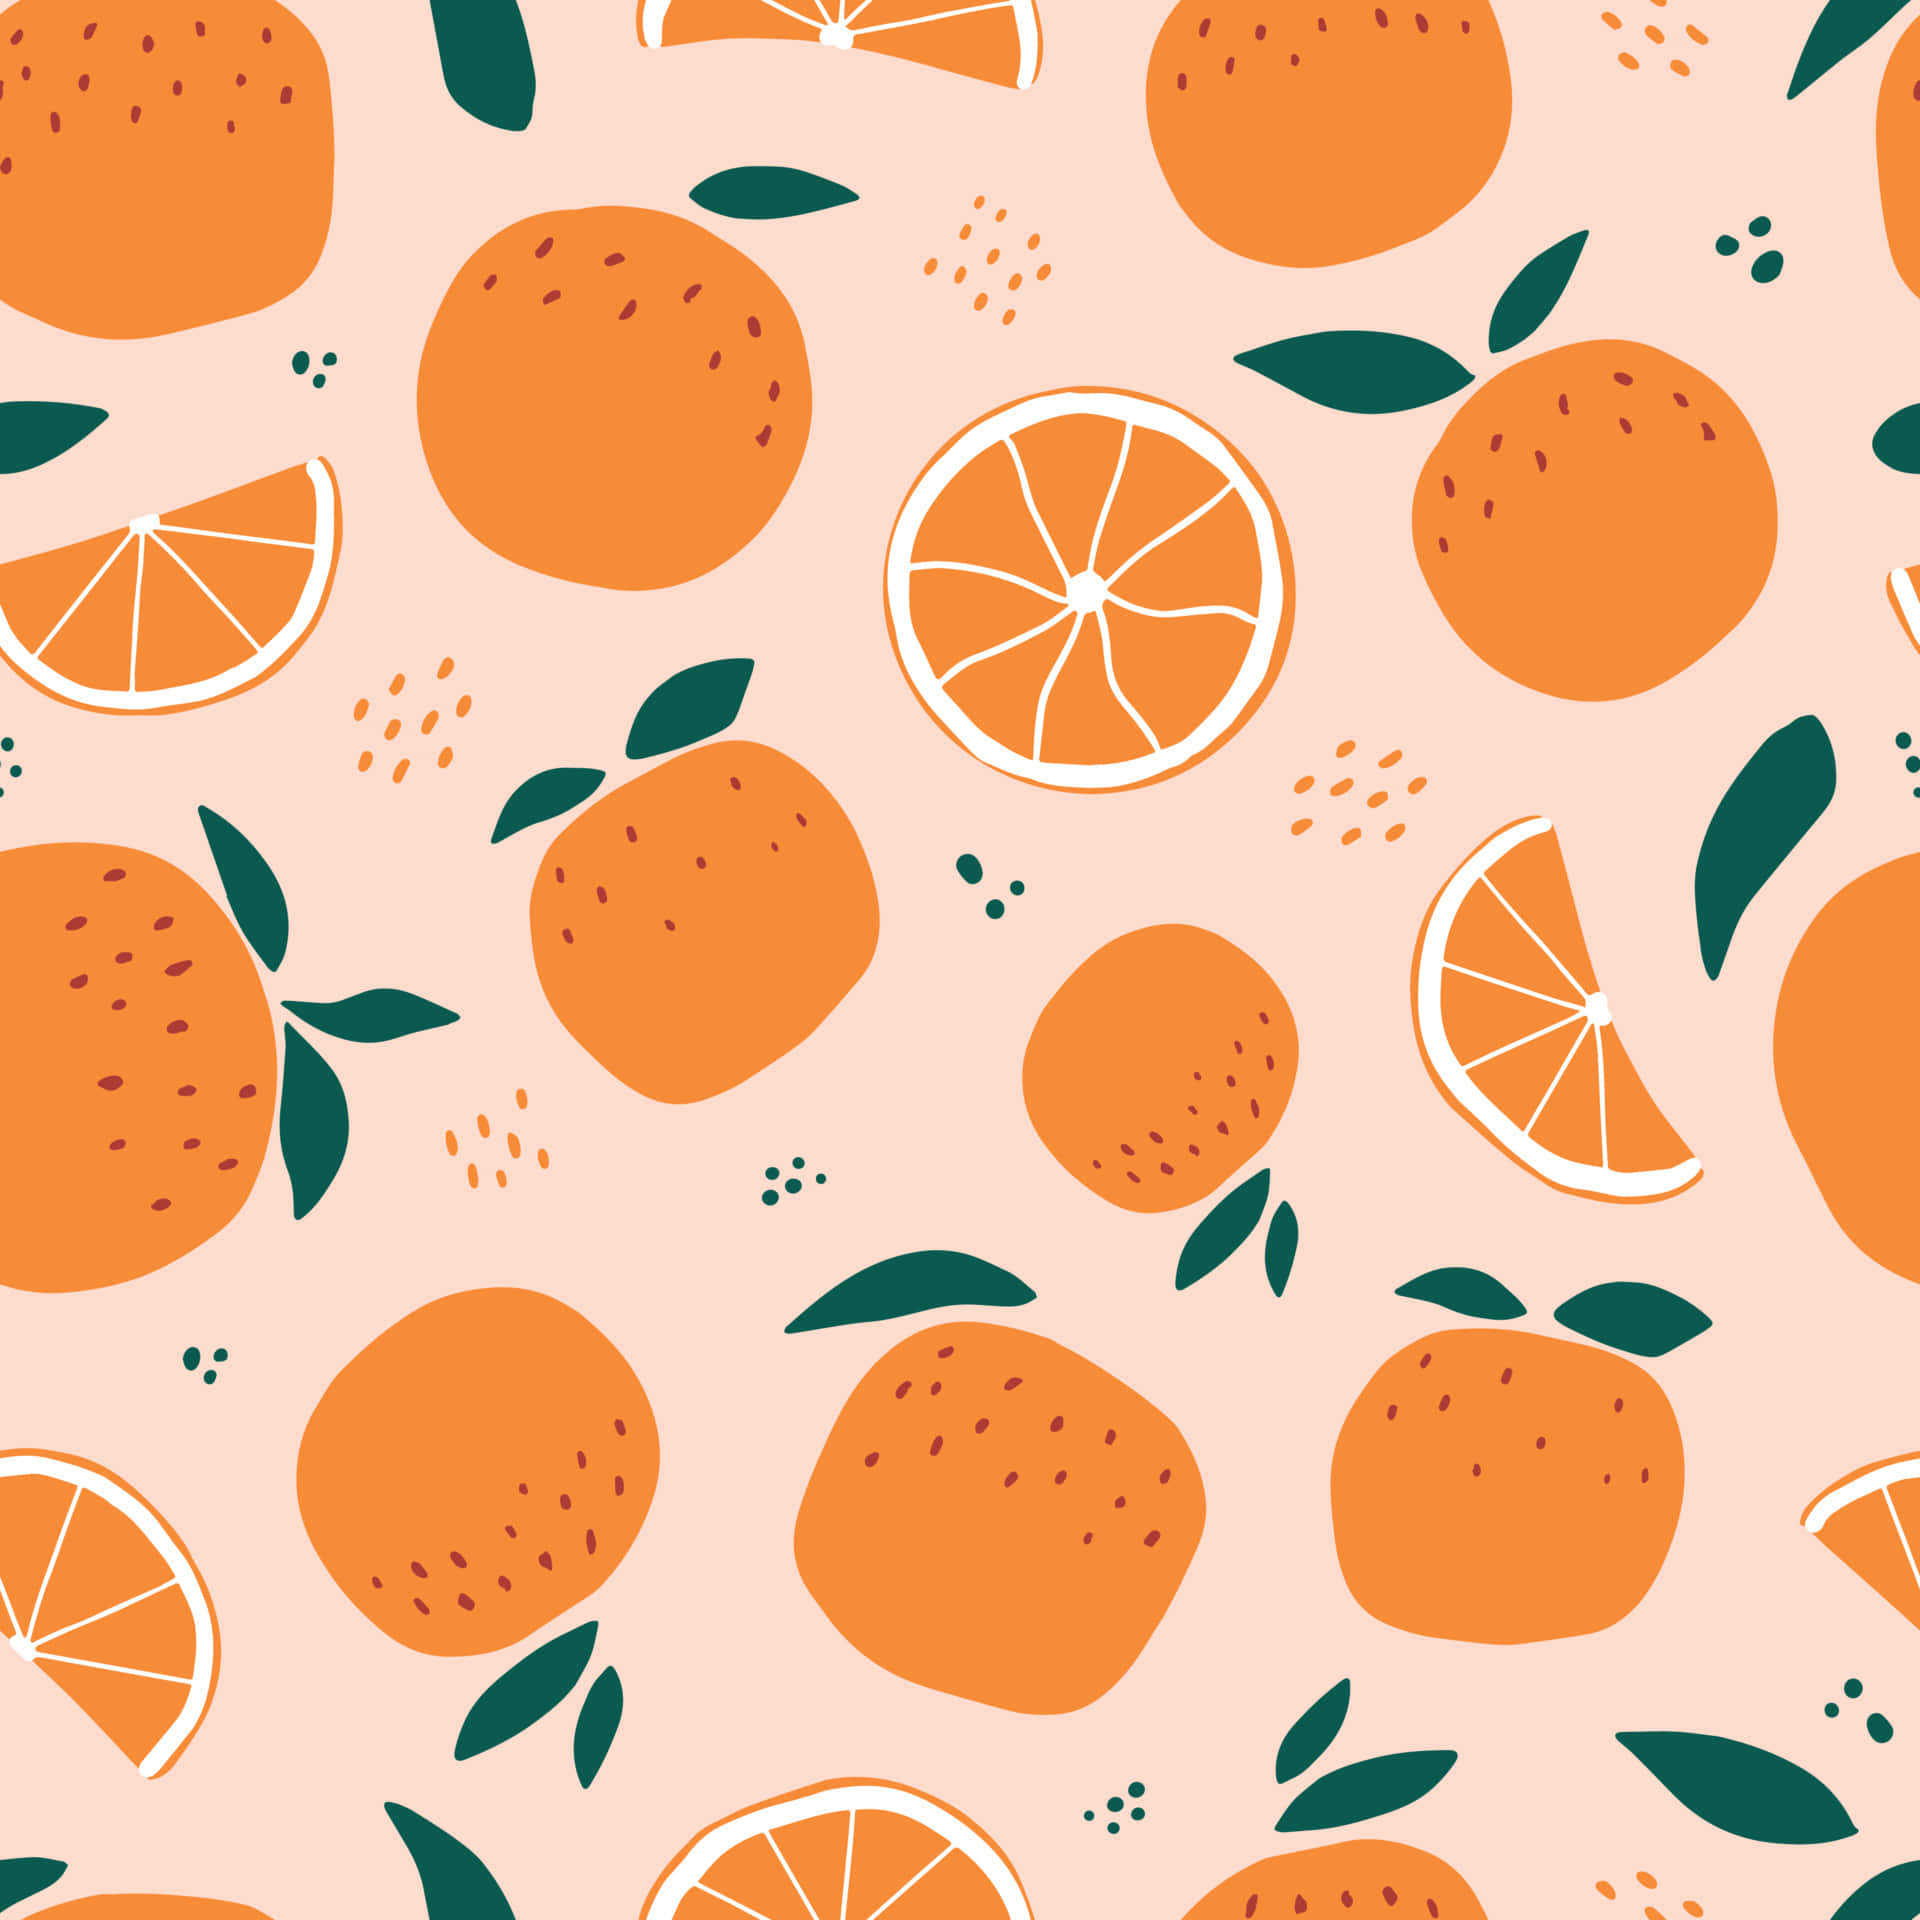 Oranges Are On A Pink Background Wallpaper